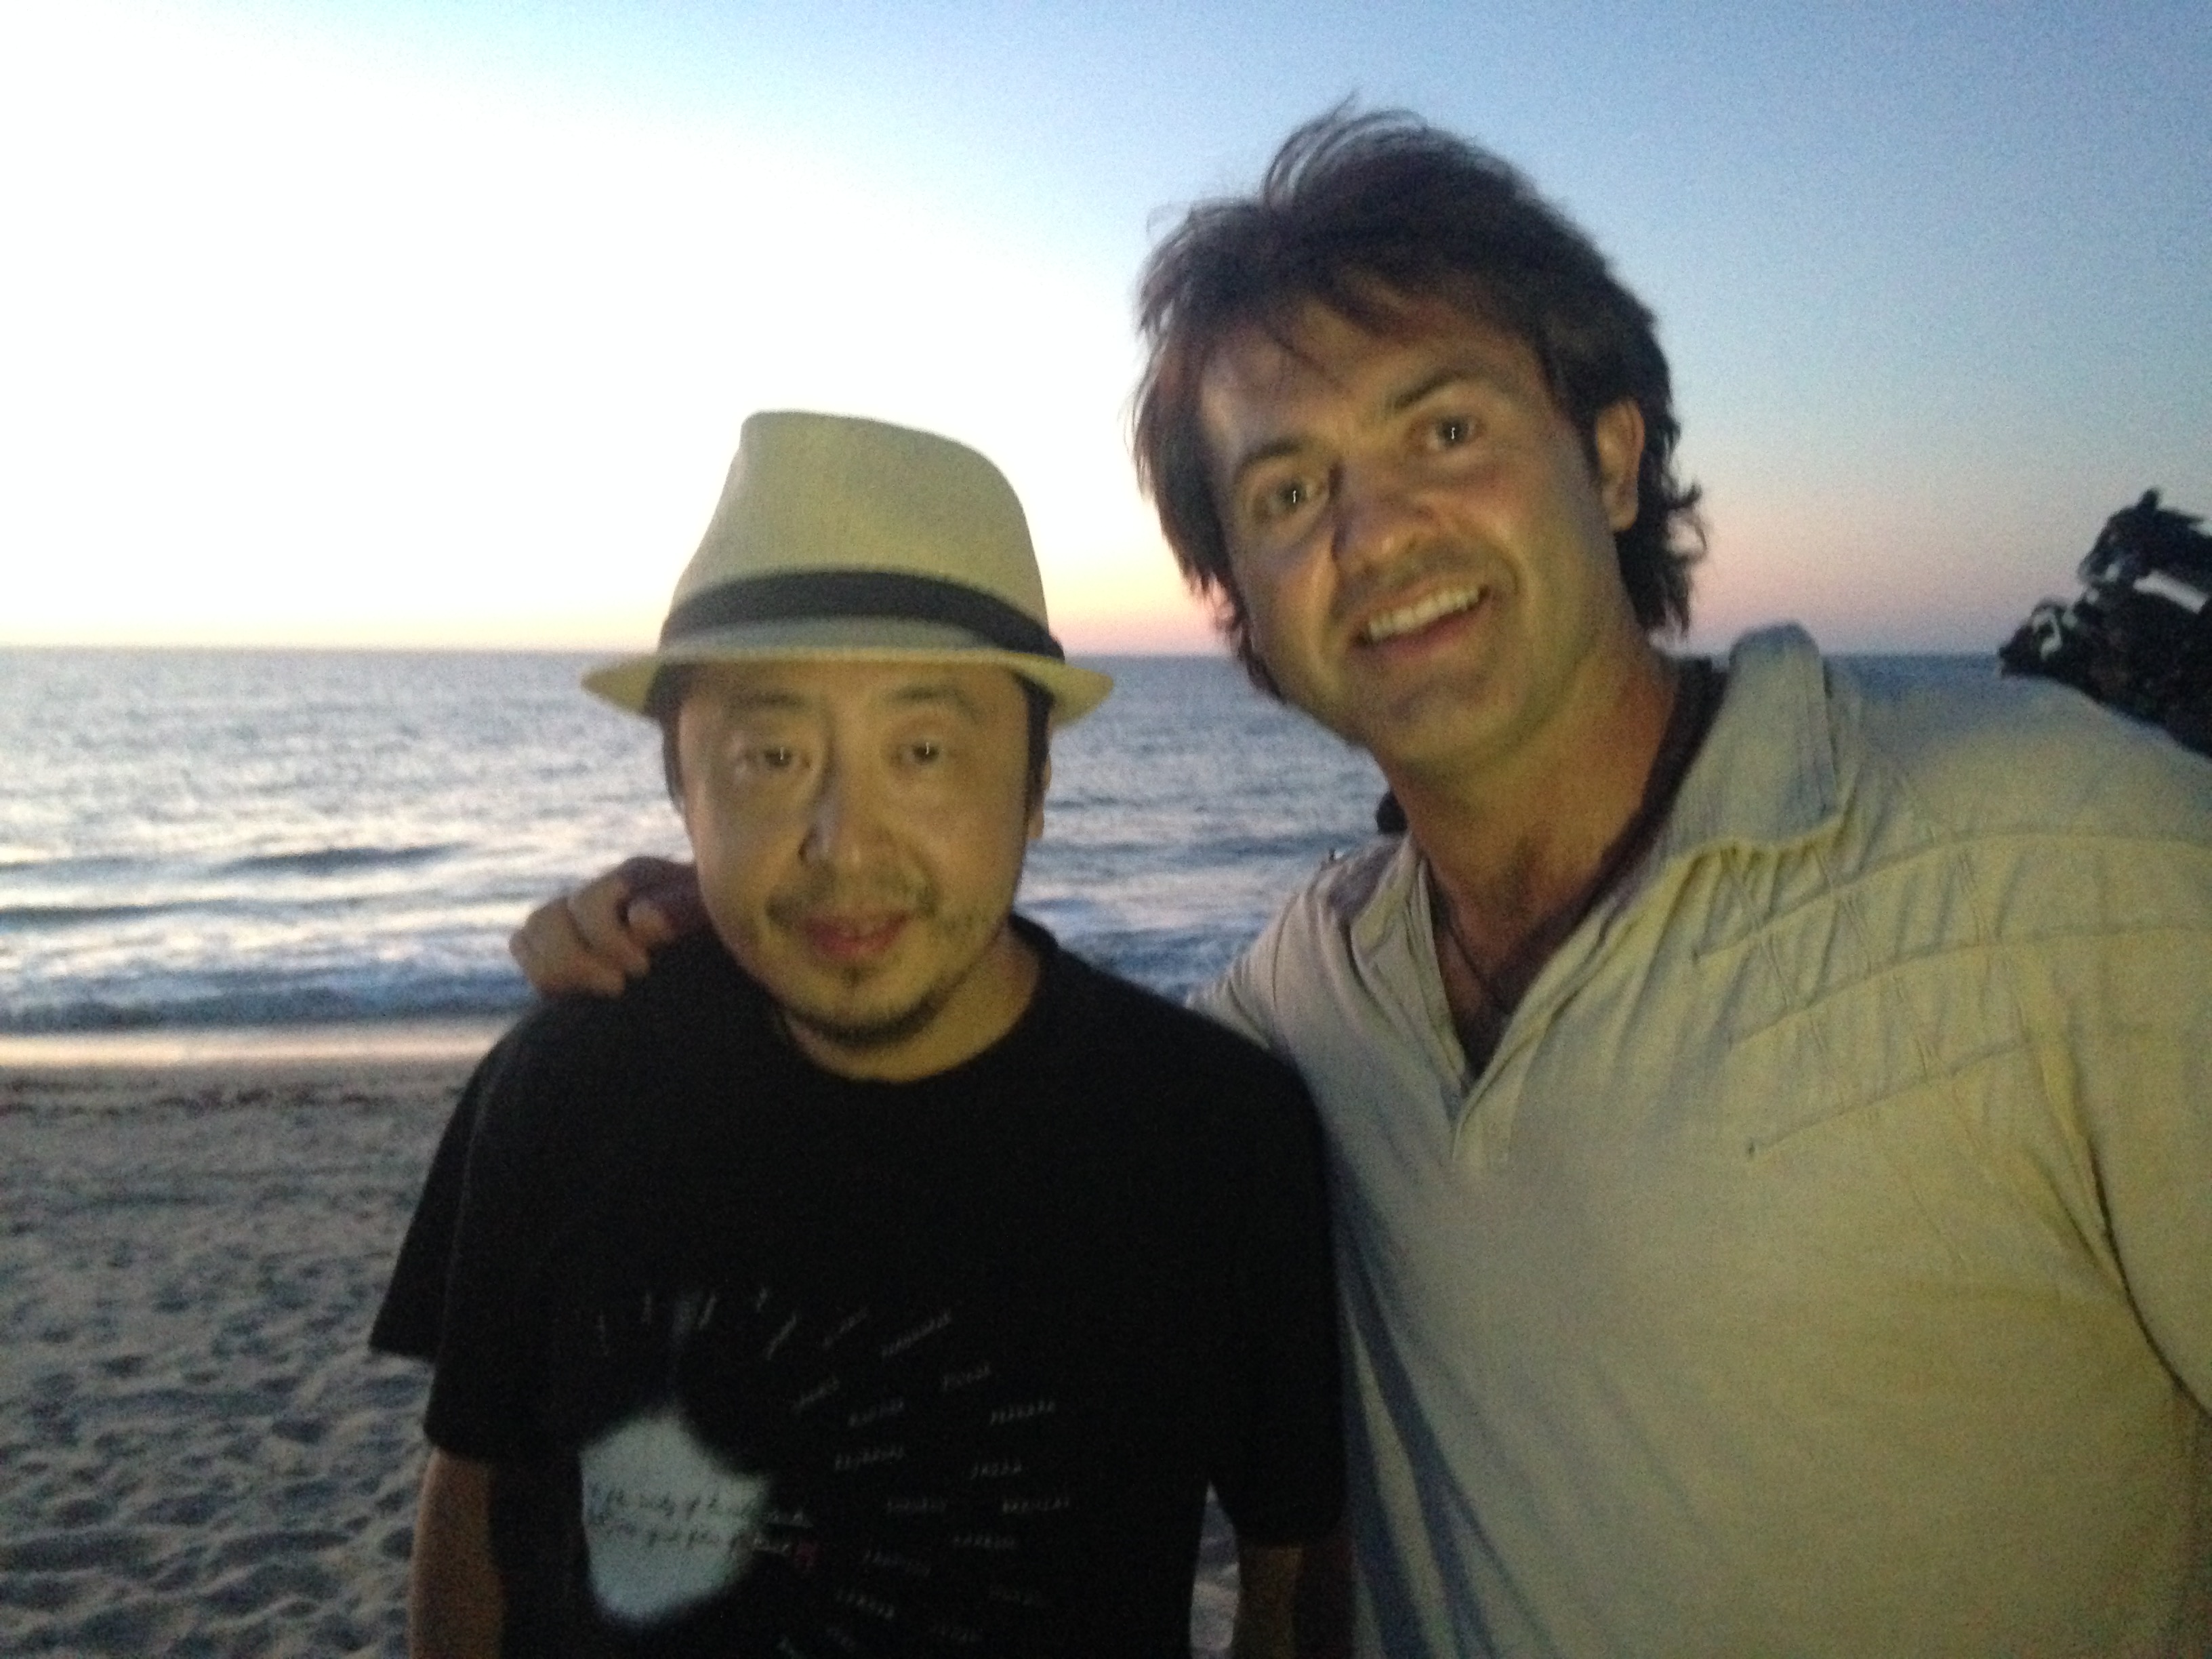 Jia Zhangke and me filming Mountains May Depart. Really nice cast and crew that made it a real fun shoot.